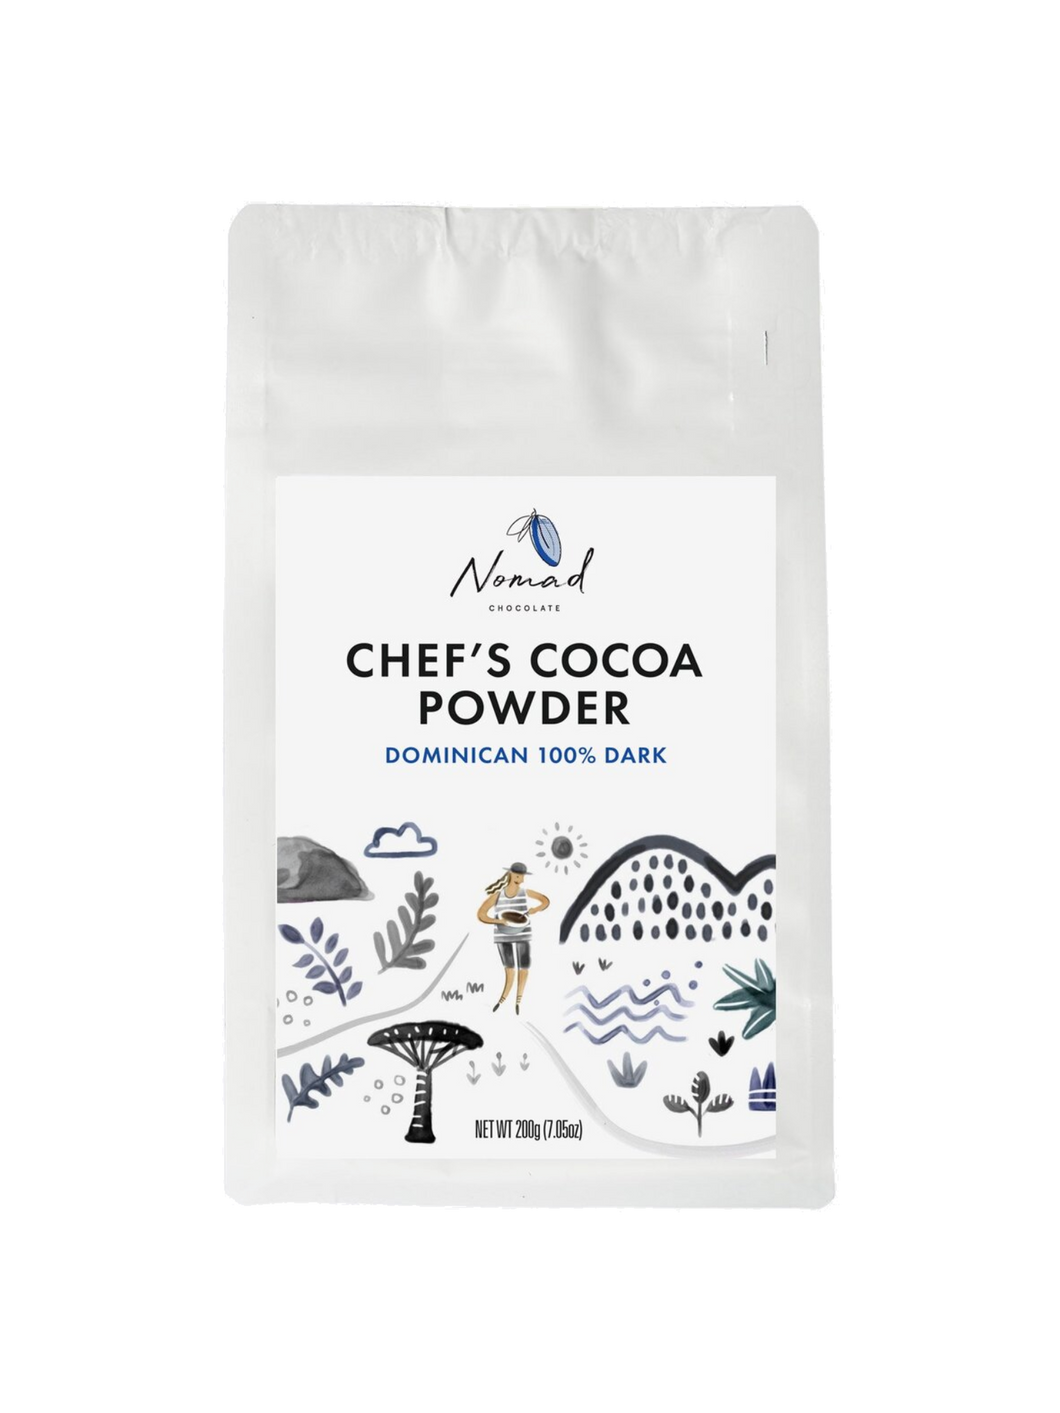 Nomad Chocolate Chef's Cocoa Powder Dominican 100% Dark, white packaging front. Girl wandering through the Nomad Chocolate landscape mixing a chocolate batter in a mixing bowl. Vegan, Gluten Free, Dairy Free, No Sugar